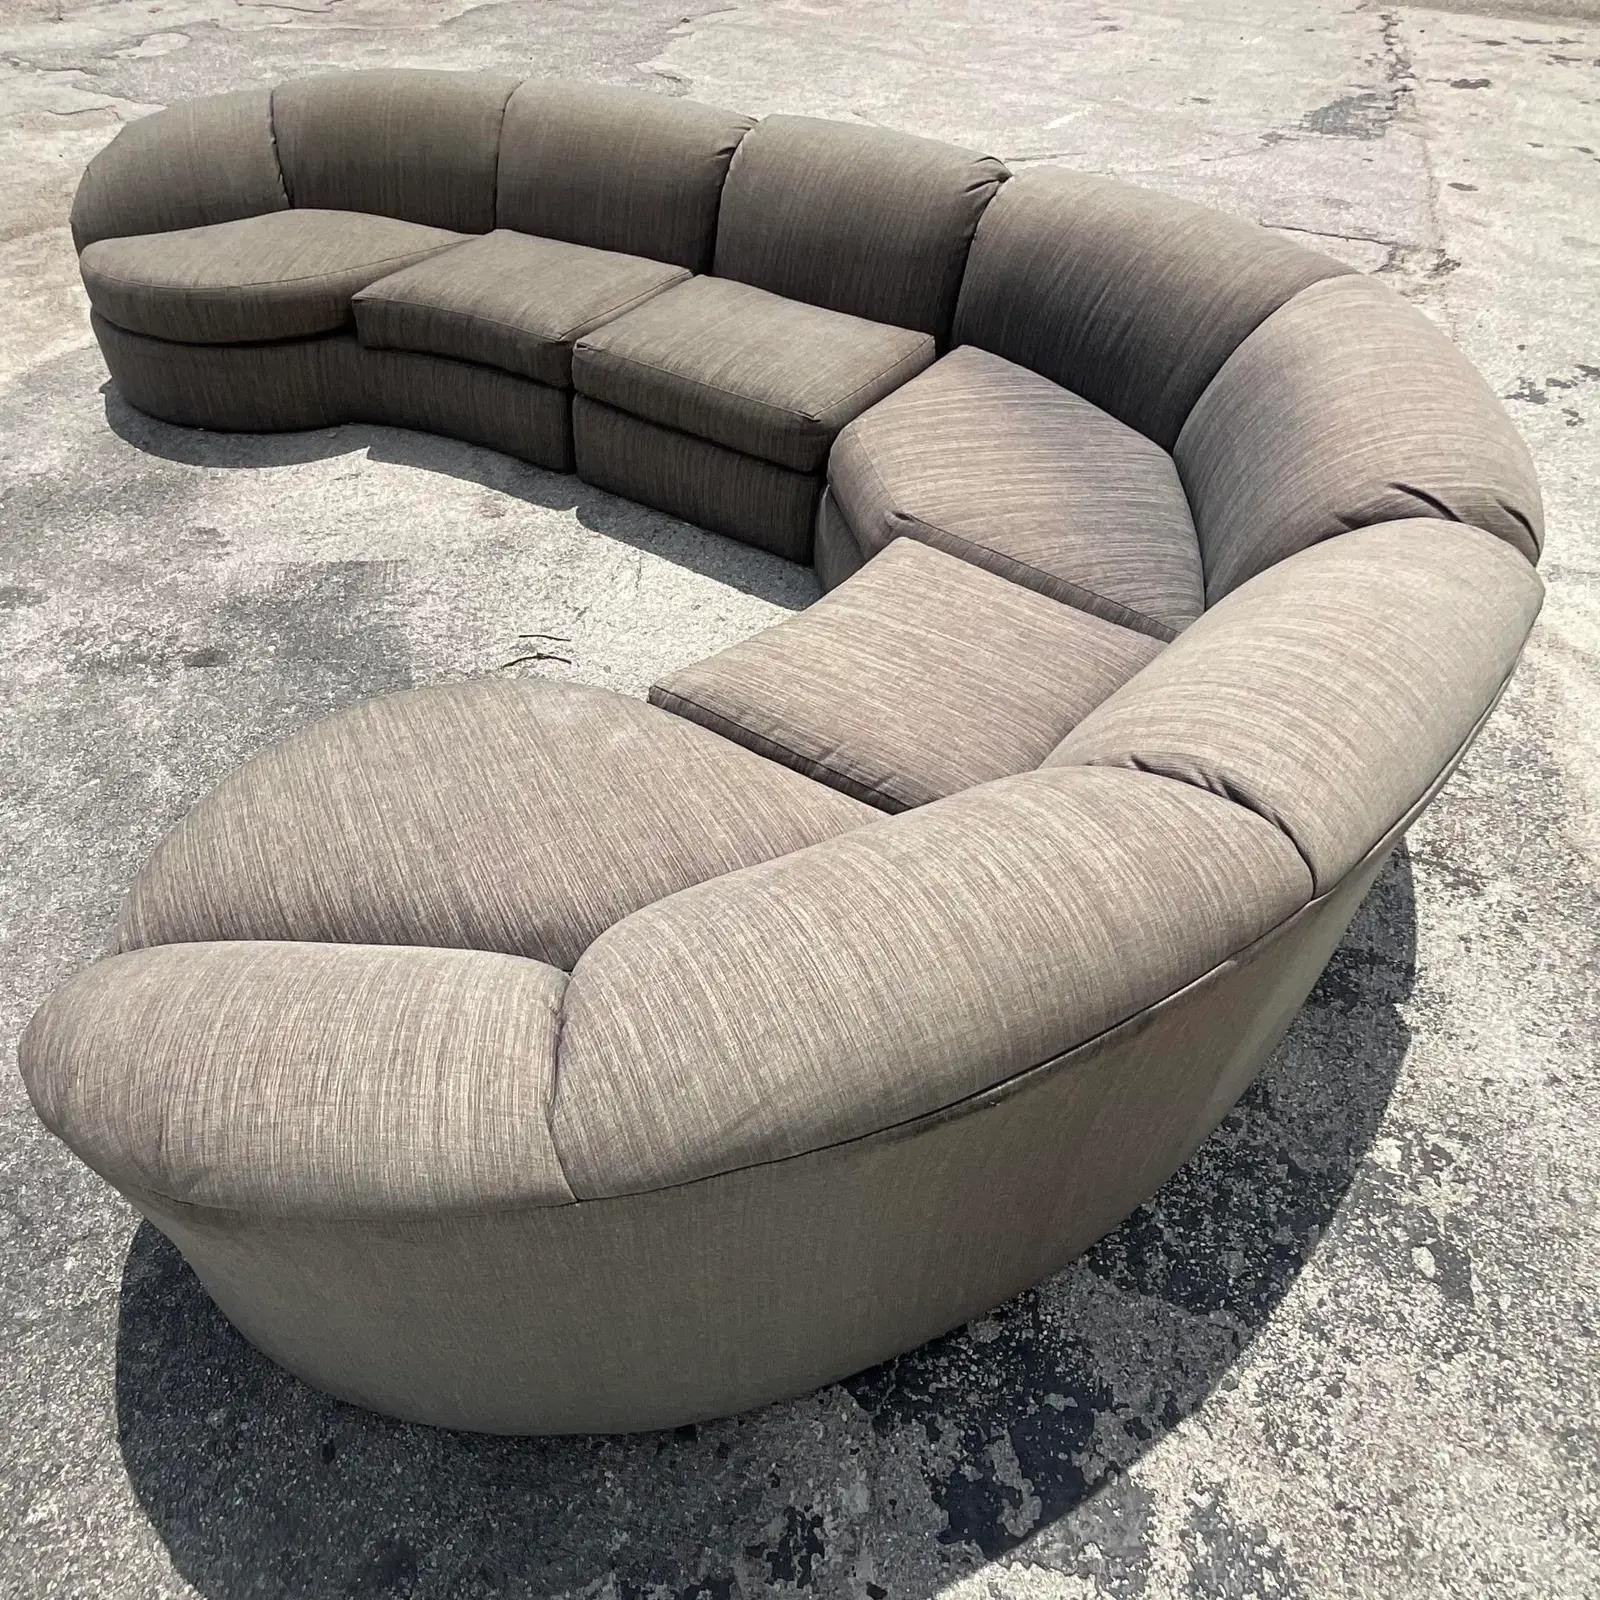 Fantastic vintage Contemporary sectional sofa. Designed by the legendary John Mascheroni for Swaim. Beautiful curved waterfall shape with a chic biomorphic shape. Great as is or update with your favorite upholstery. Acquired from a Palm Beach estate.